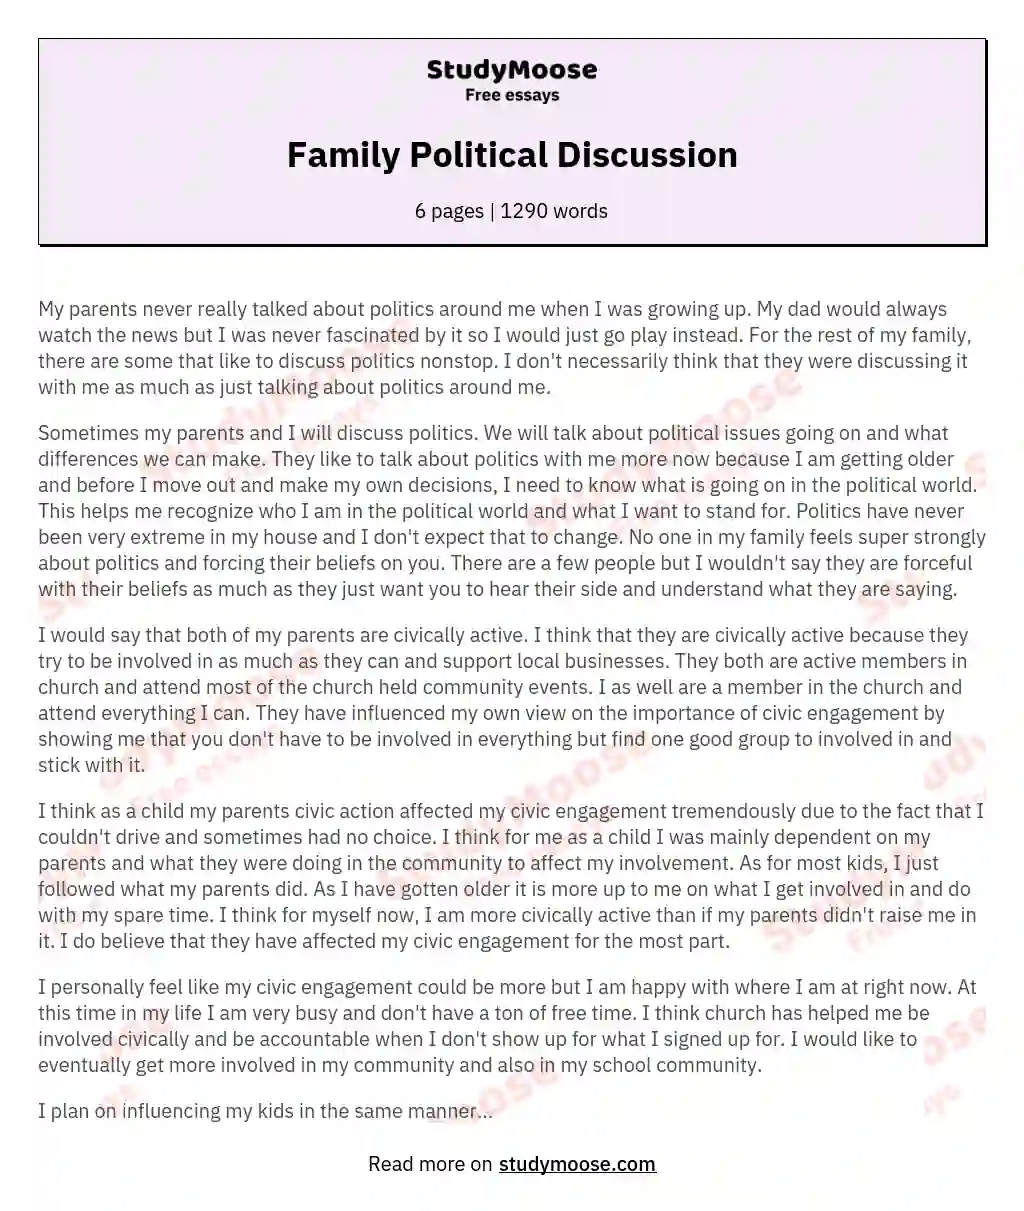 Family Political Discussion essay